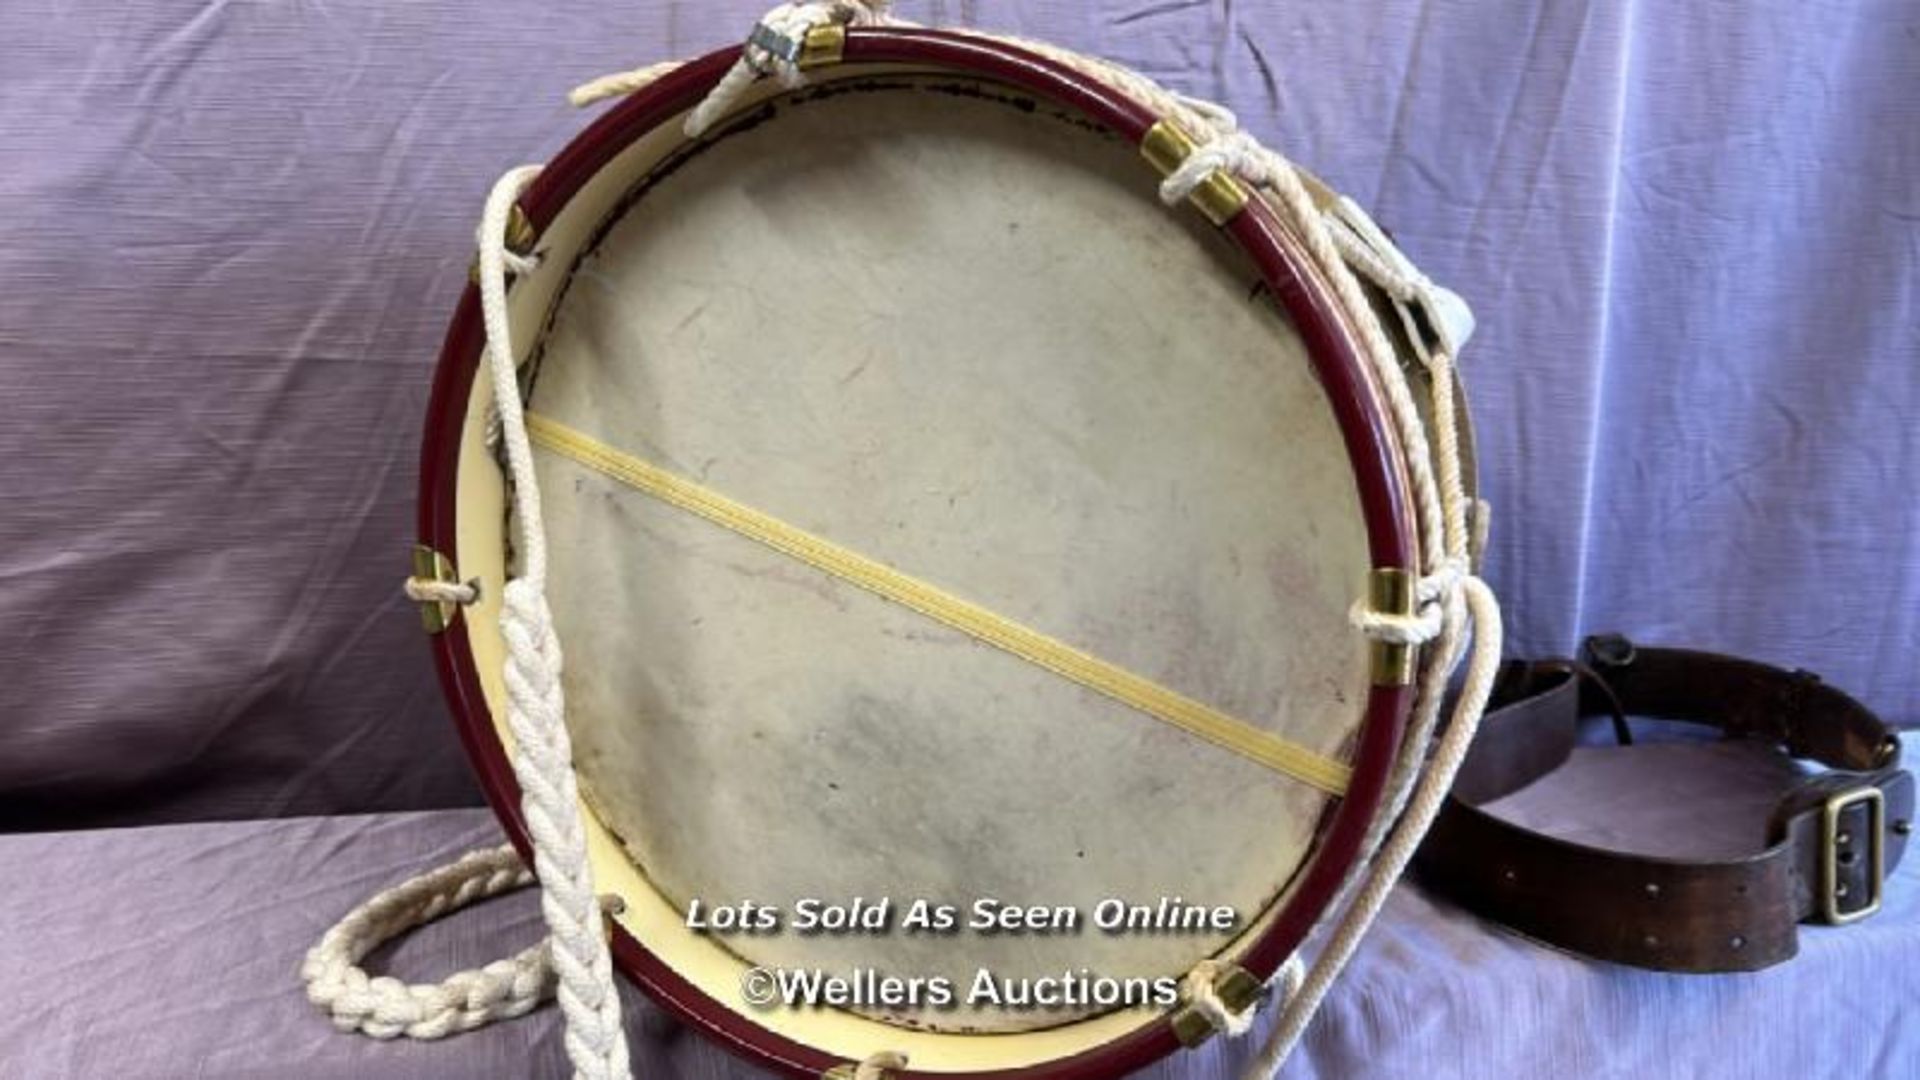 MILITARY BAND DRUM FROM THE '4TH BN THE WILTSHIRE REGIMENT' WITH BATTLE HONOURS, PRE WORLD WAR TWO - Image 8 of 10